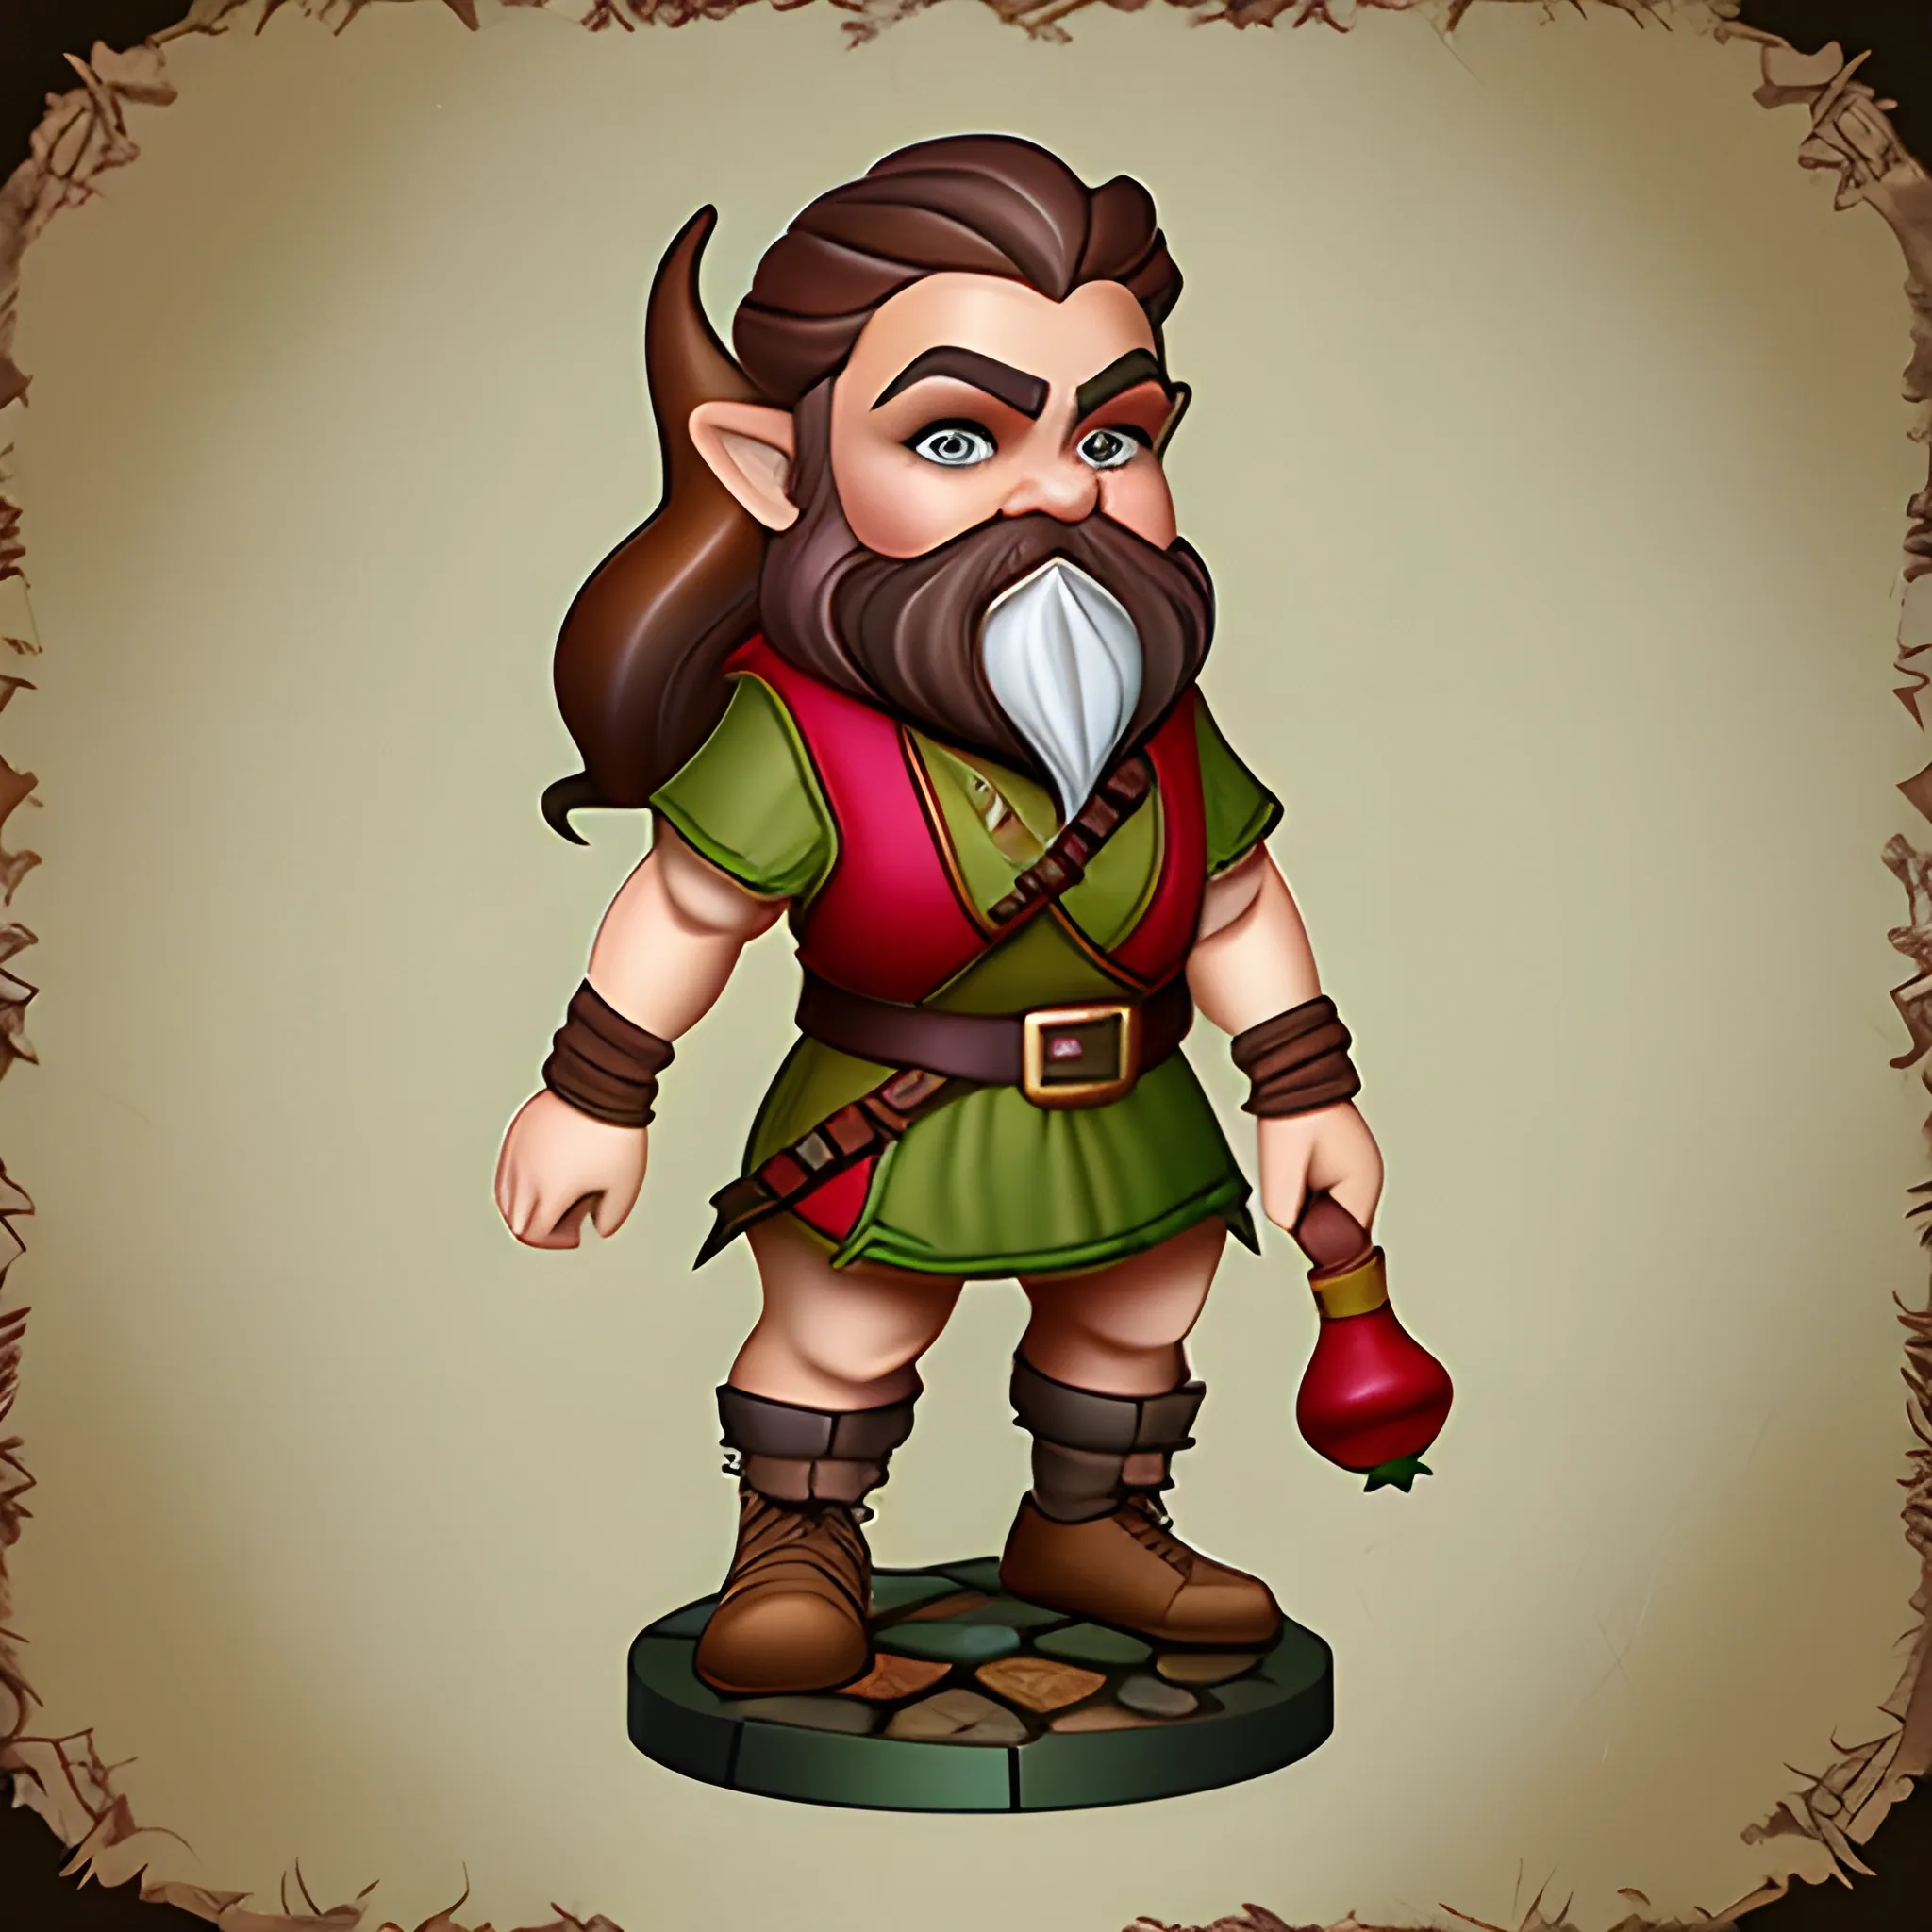 tan skin, green eyes, light brown hair, gnome, rouge, 44 years old, dnd art style